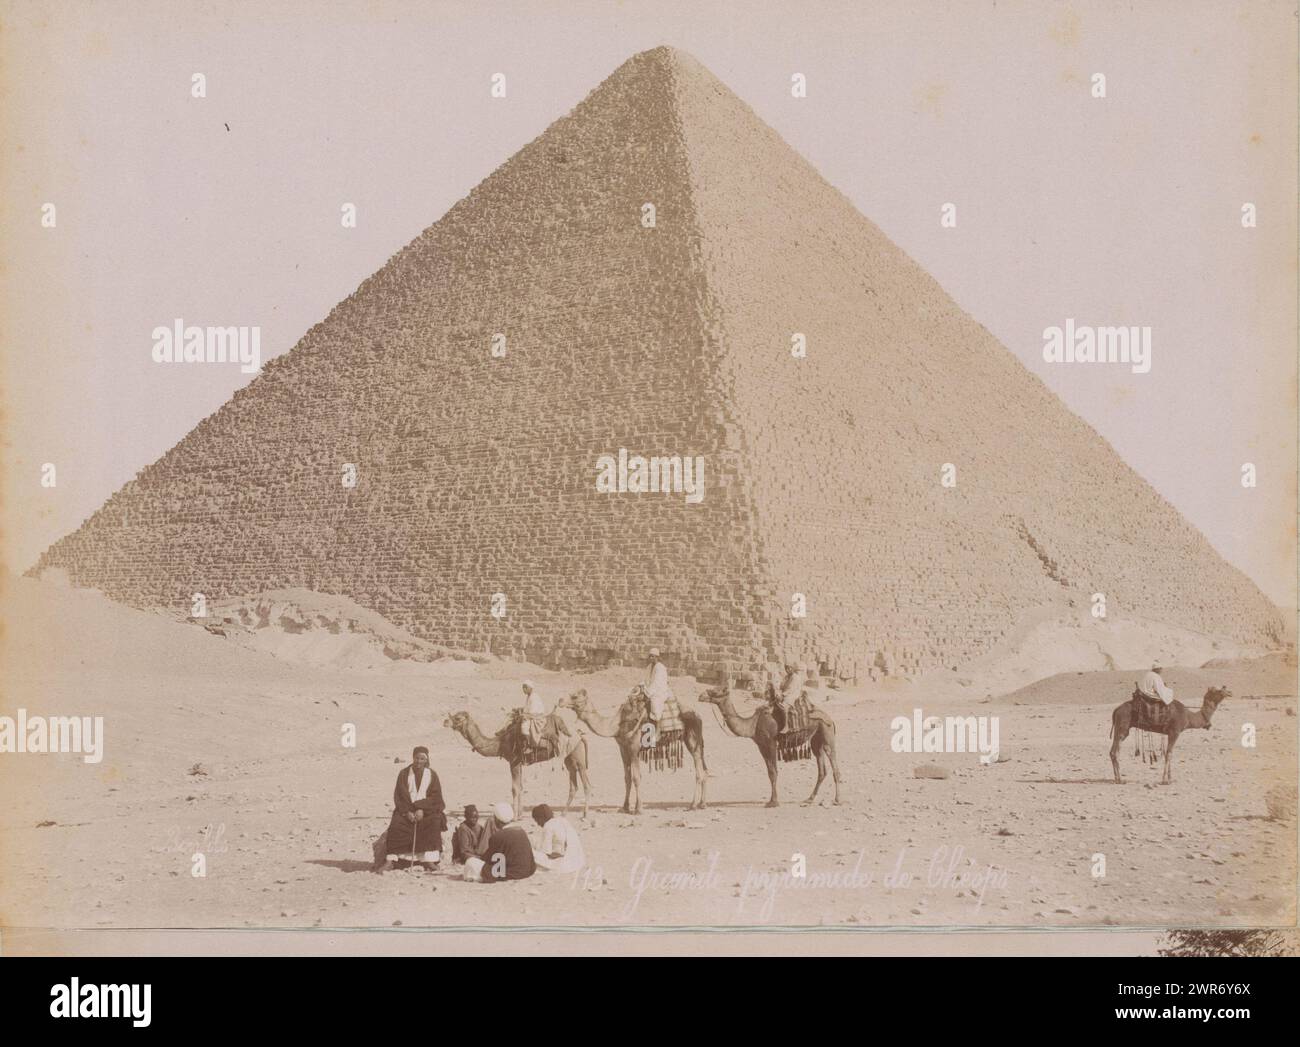 View of the Pyramids of Giza, anonymous, Gizeh, 1860 - 1900, paper, albumen print, height 190 mm × width 278 mm, height 396 mm × width 290 mm, photograph Stock Photo